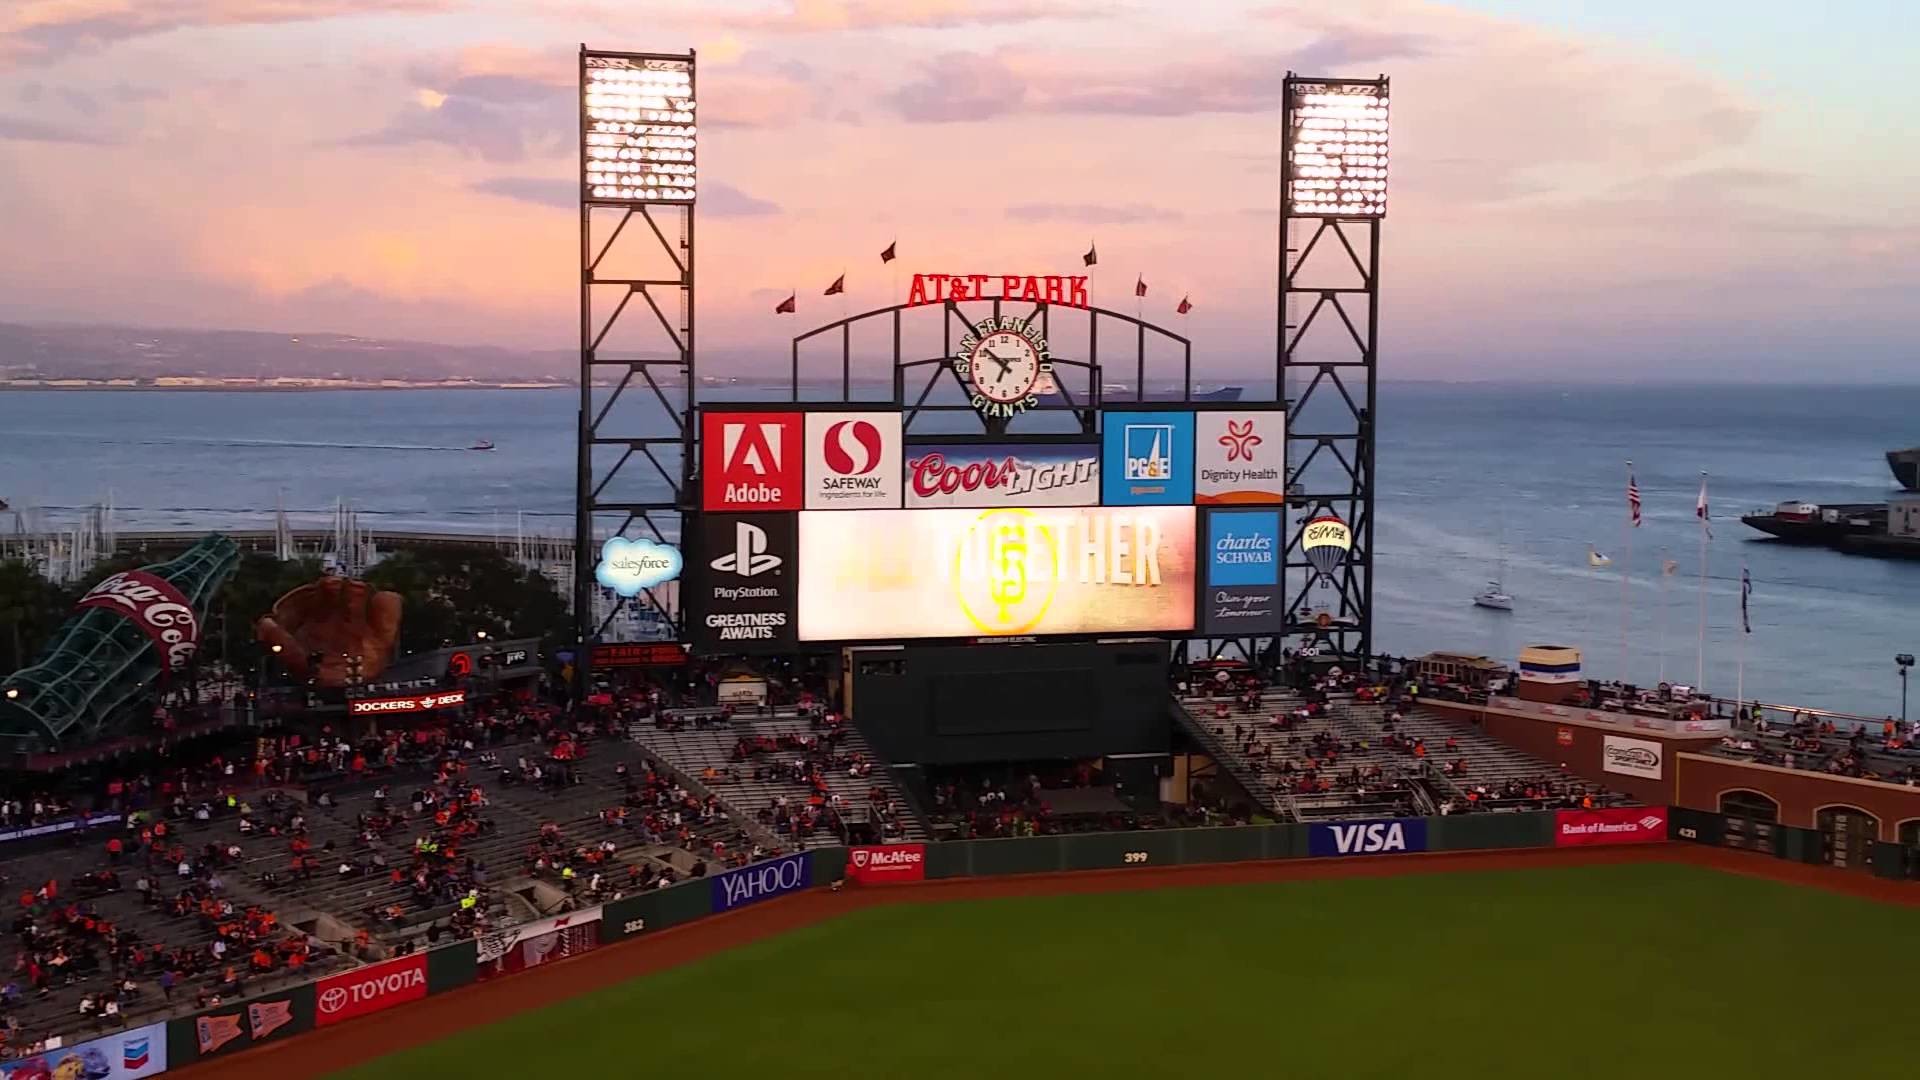 Sf Giants Intro - At&t Park - HD Wallpaper 